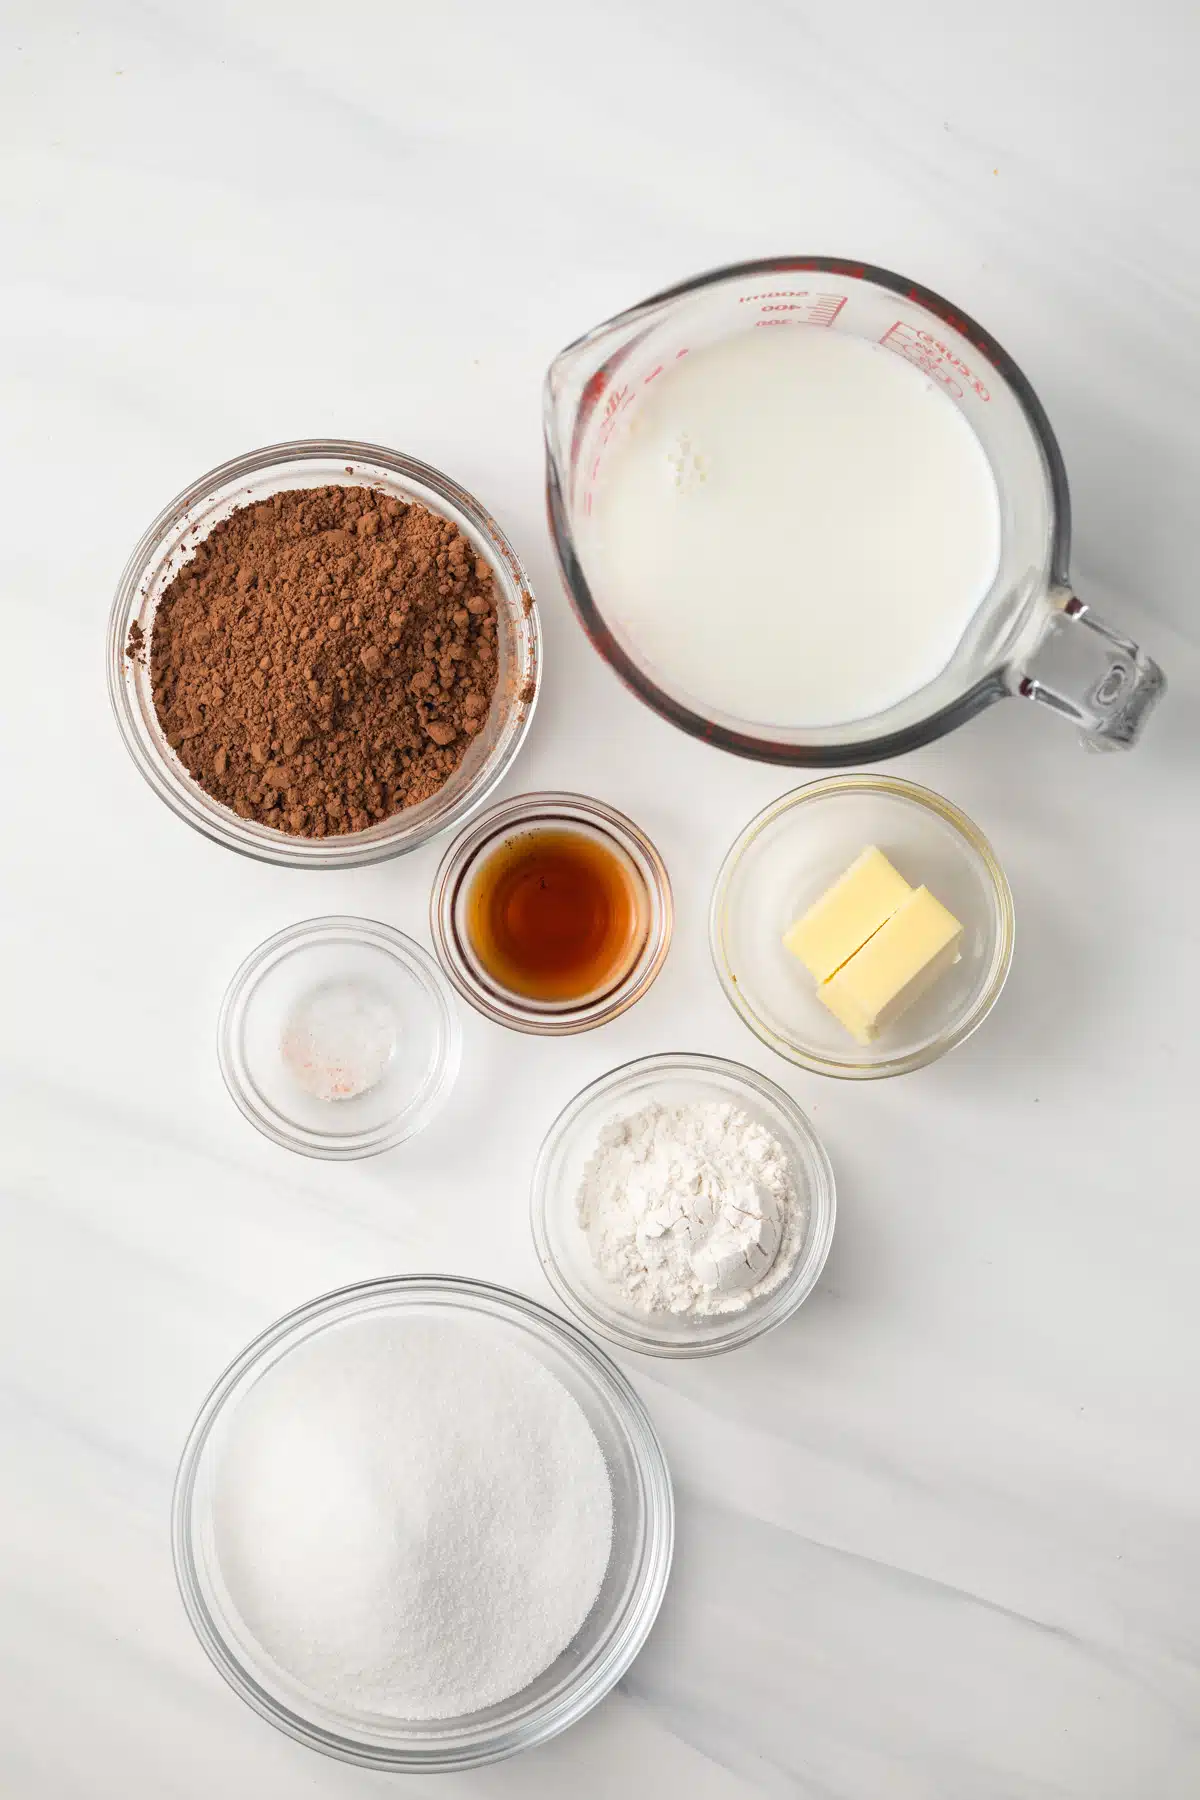 Ingredients for chocolate sauce.